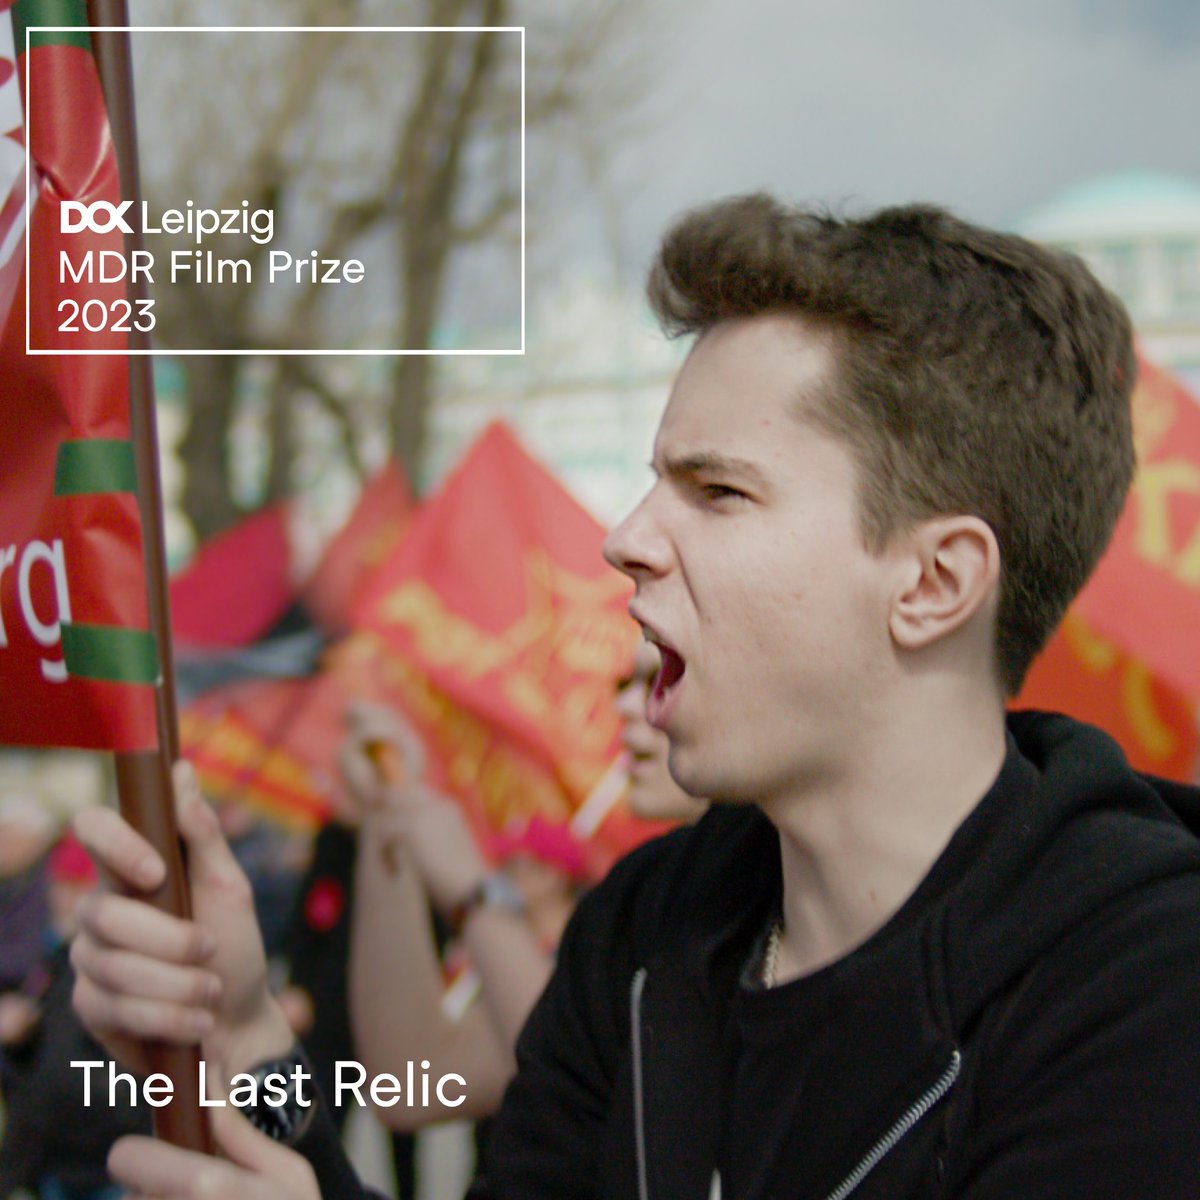 The MDR Film Prize for an outstanding eastern European documentary film was awarded to Marianna Kaat for “The Last Relic”. Hurrah, @mdrde and congrats to the film team!